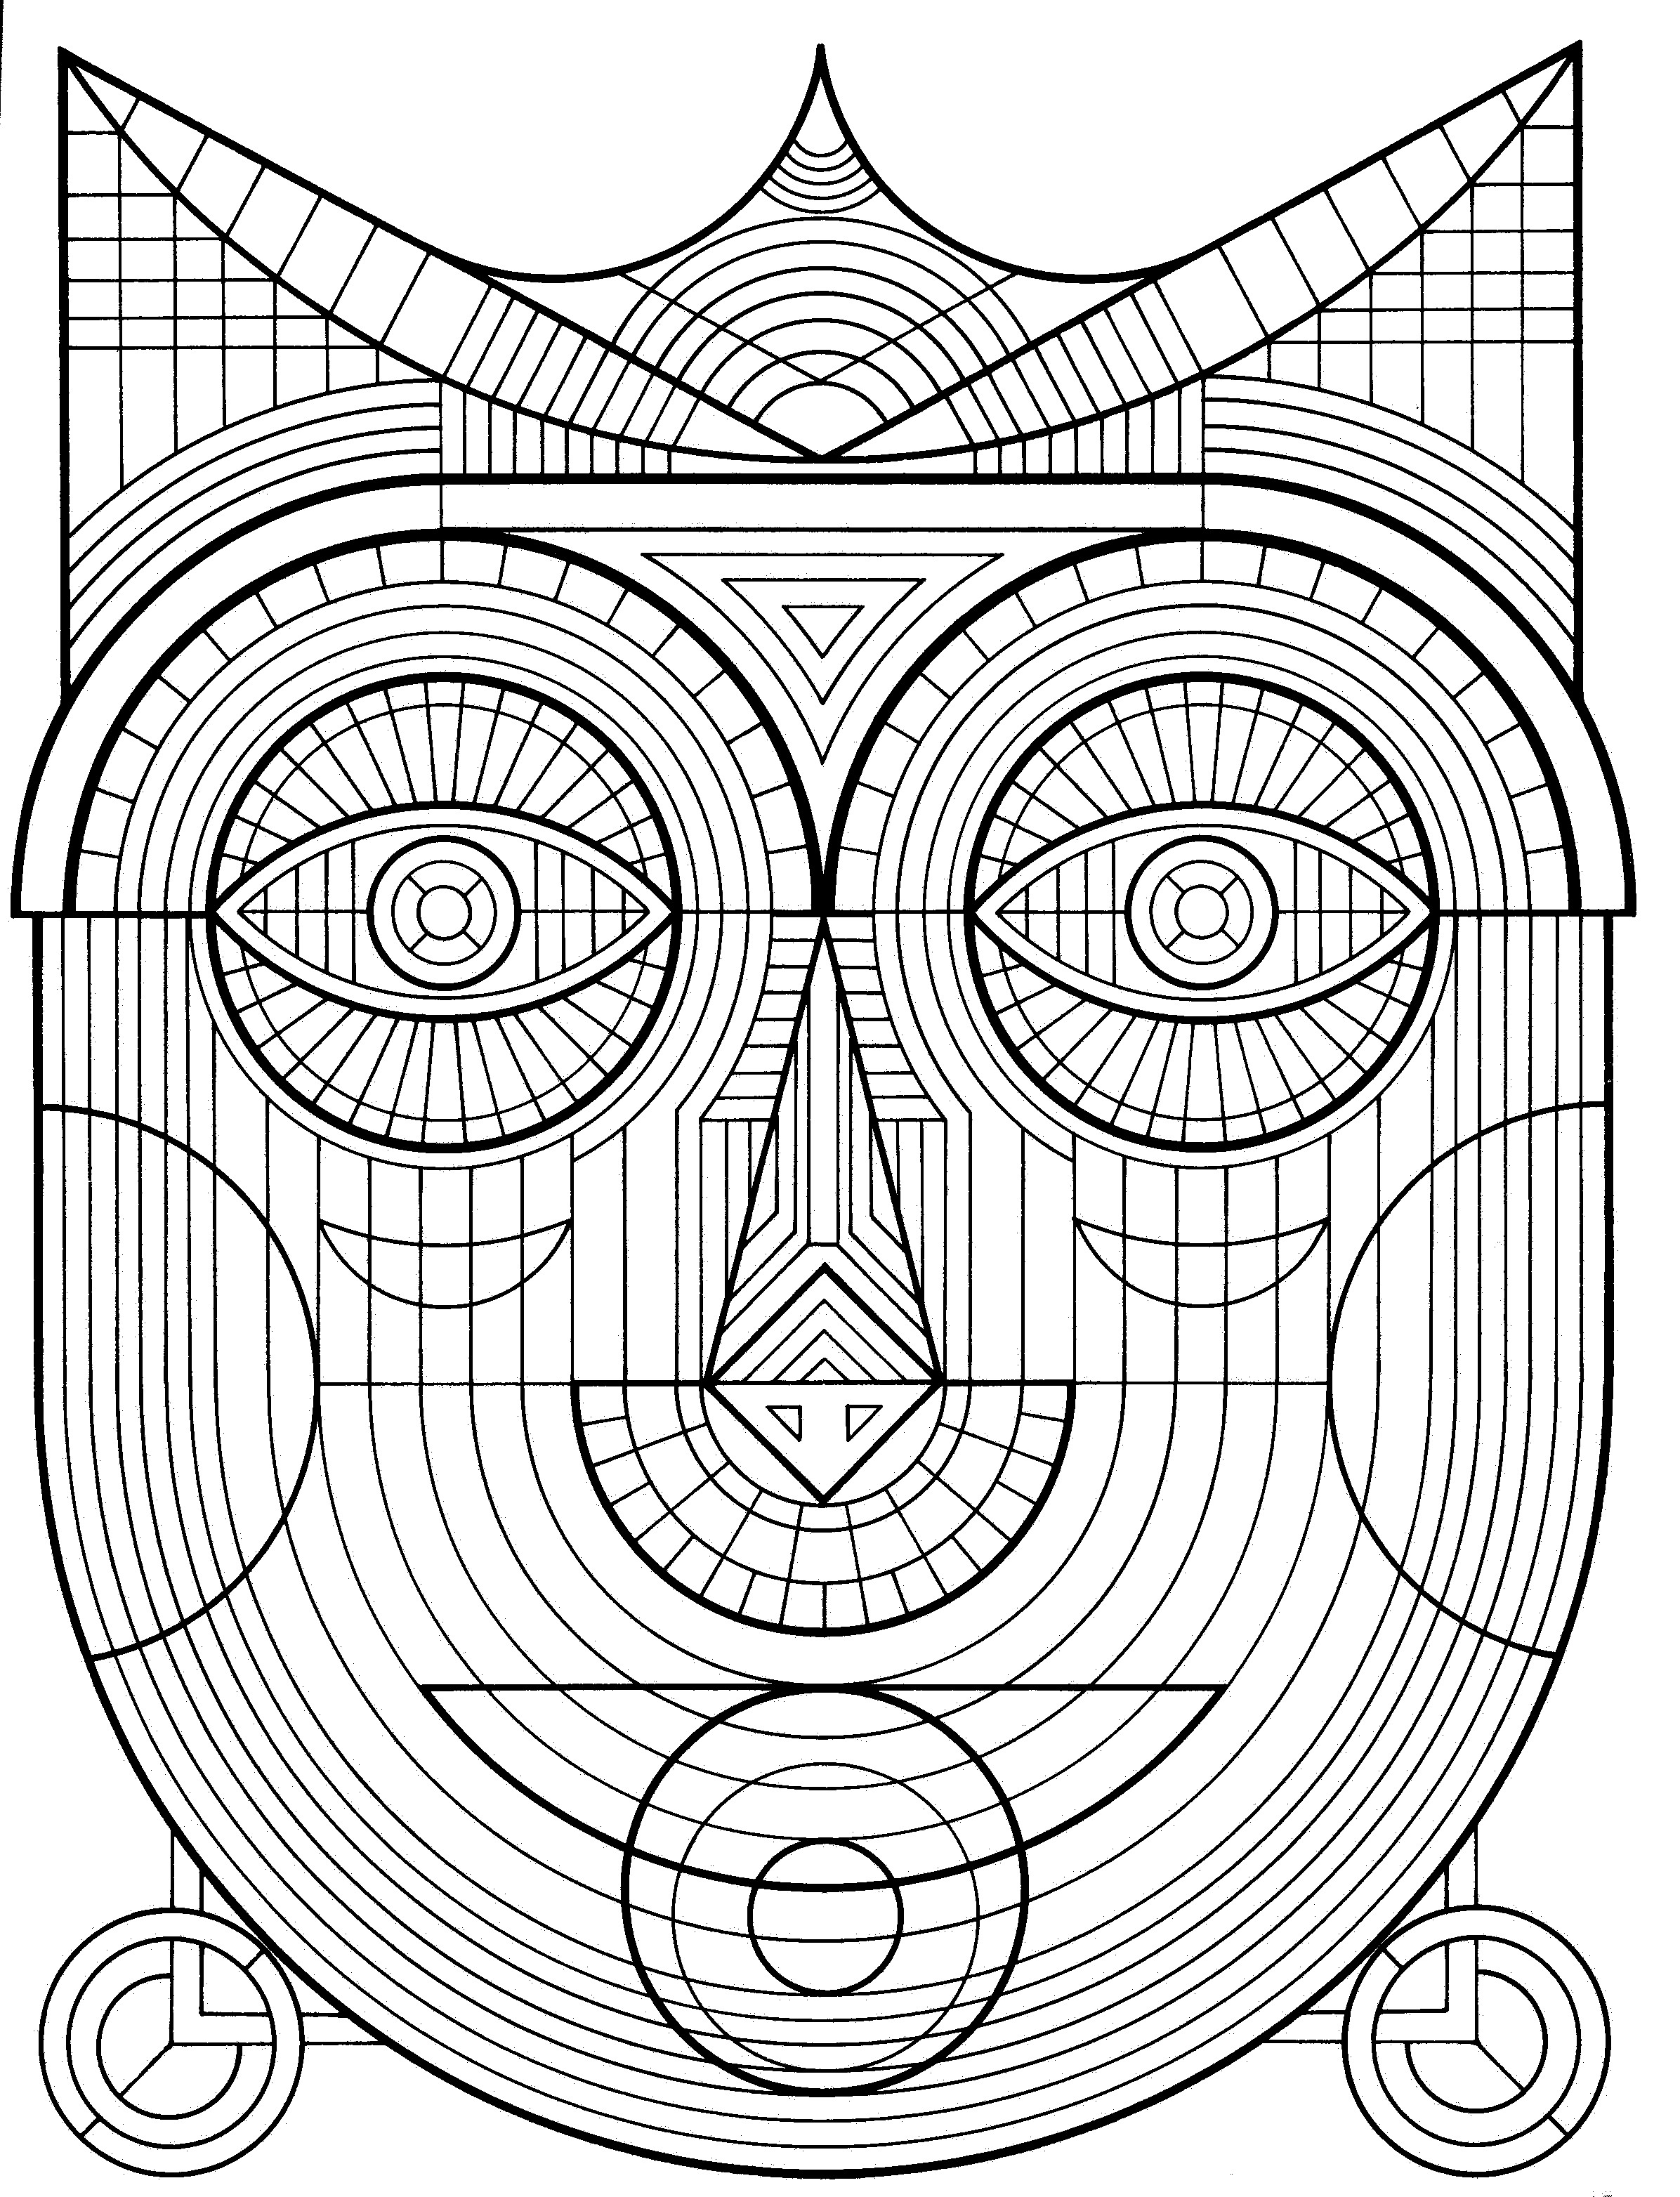 Free Geometric Coloring Pages For Adults
 Free Printable Geometric Coloring Pages for Adults